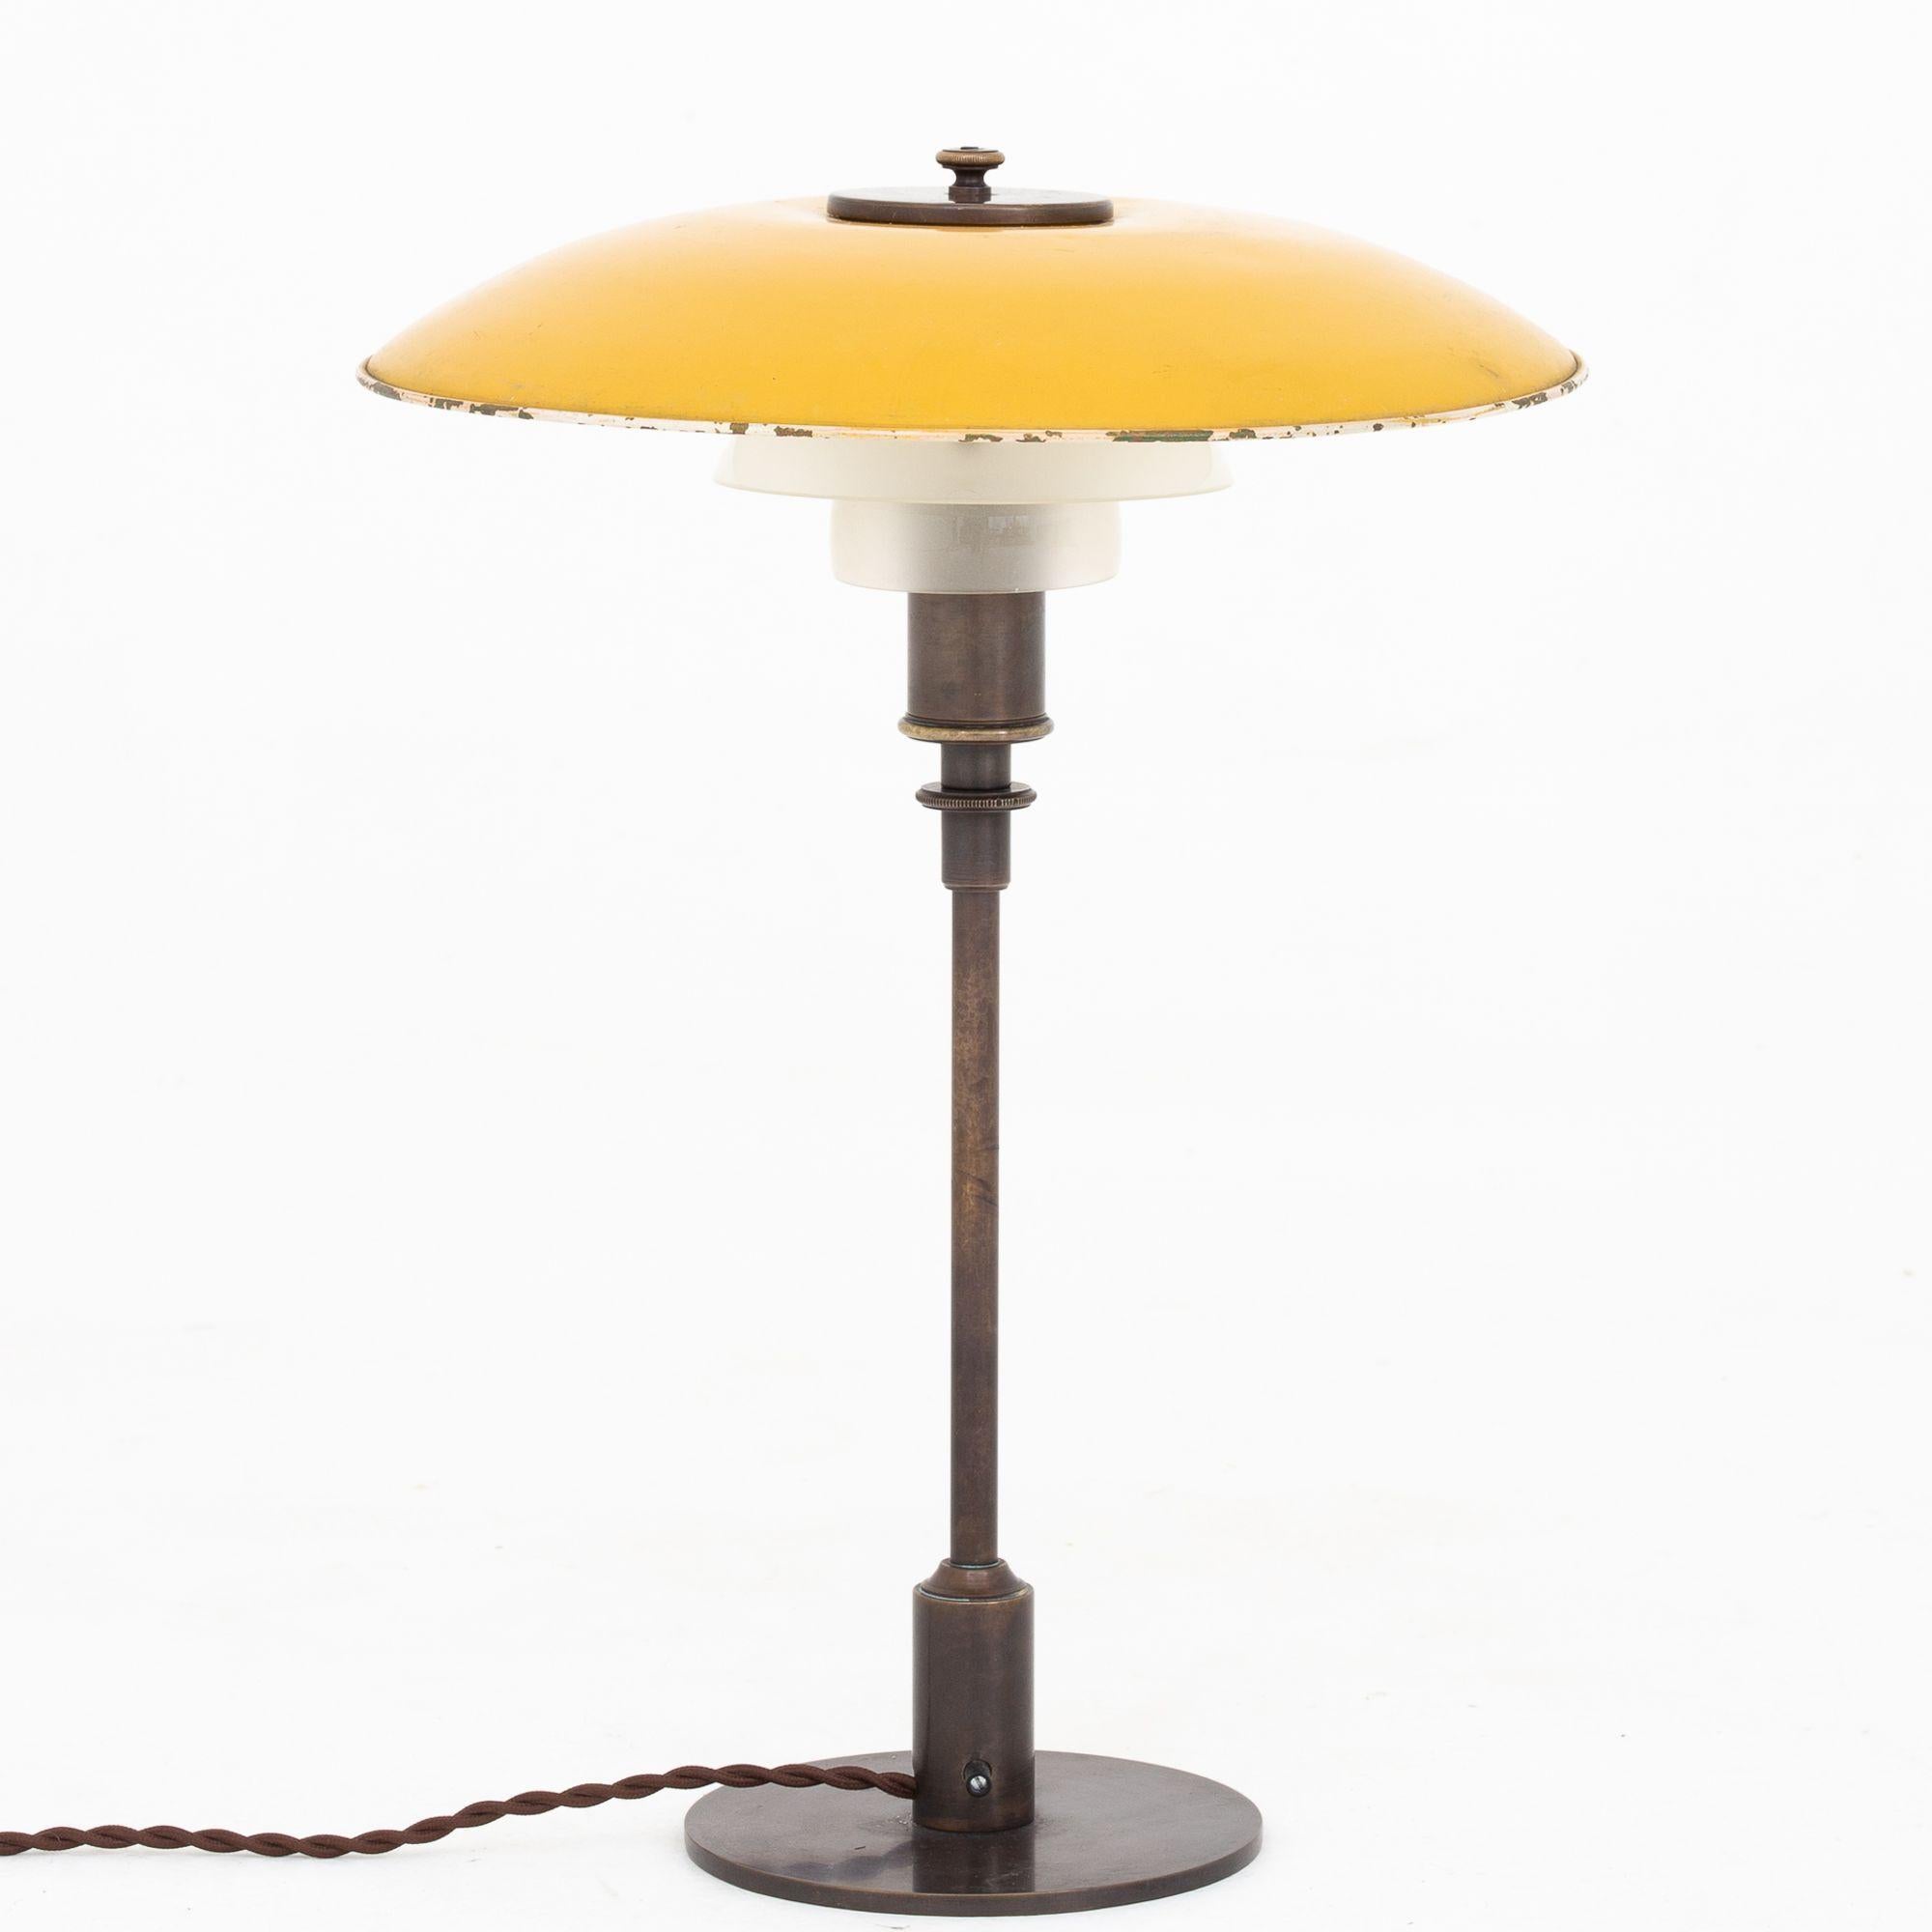 20th Century Table lamp by Poul Henningsen